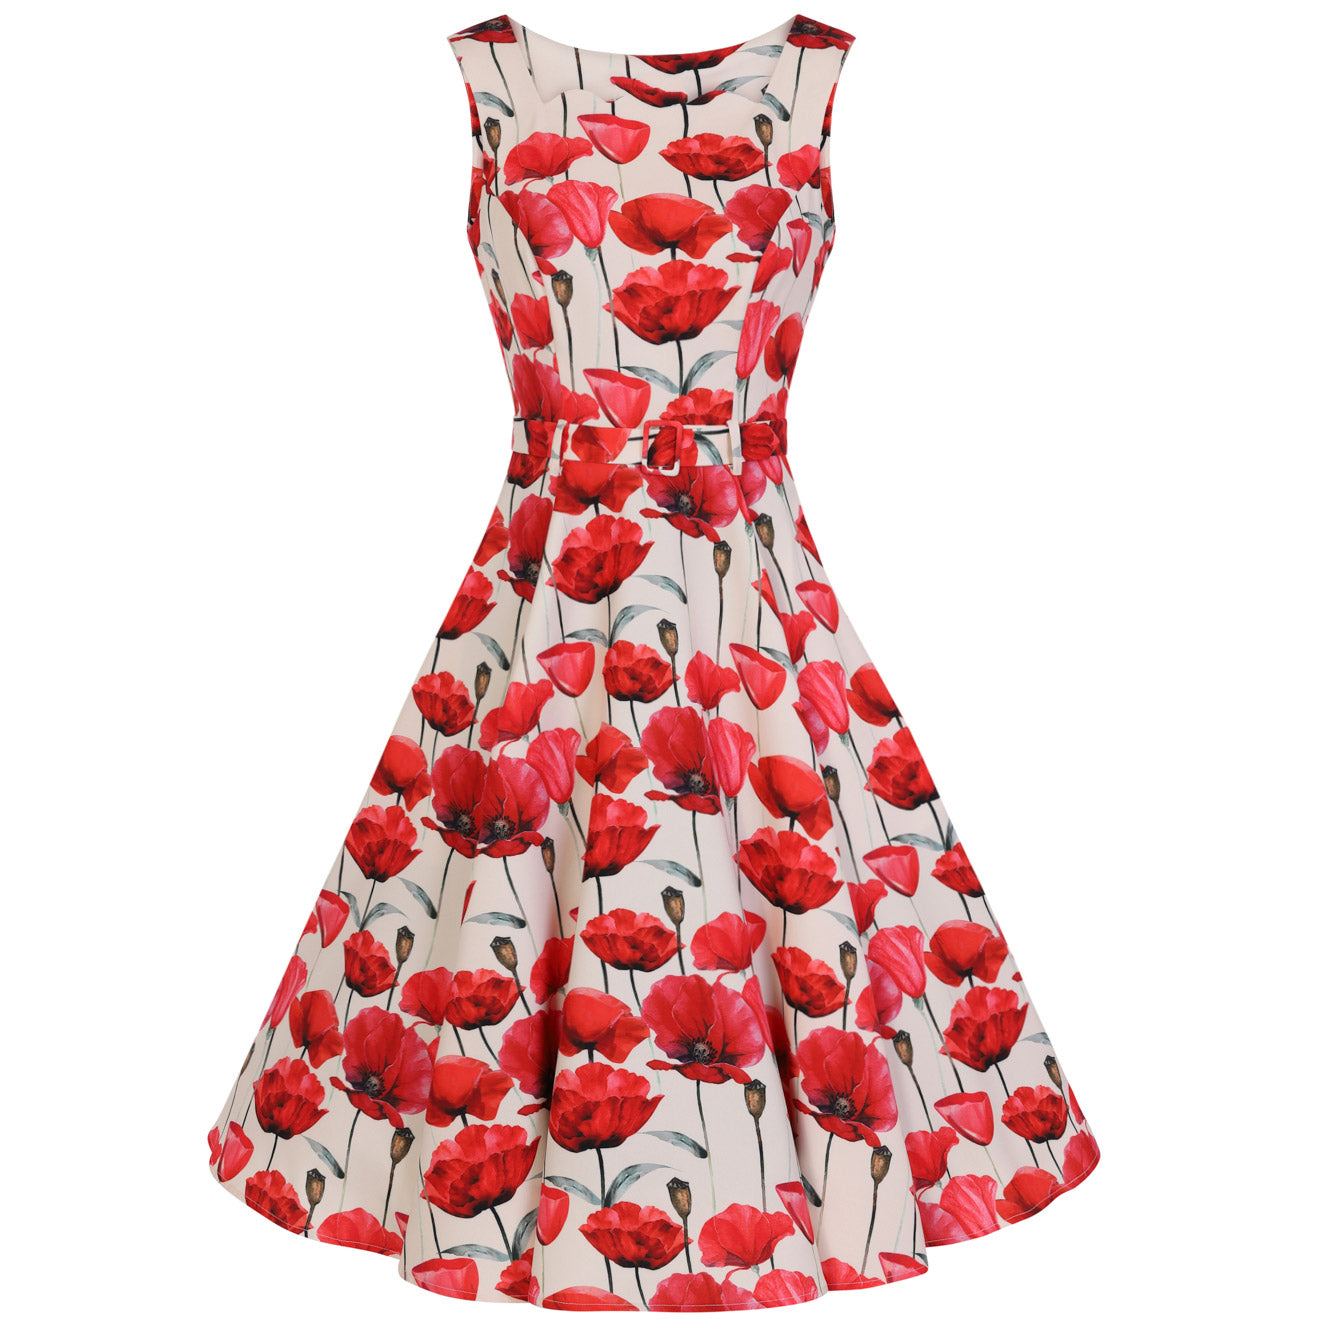 Off White Red Poppy Vintage Belted 1950s Swing Dress - Pretty Kitty Fashion